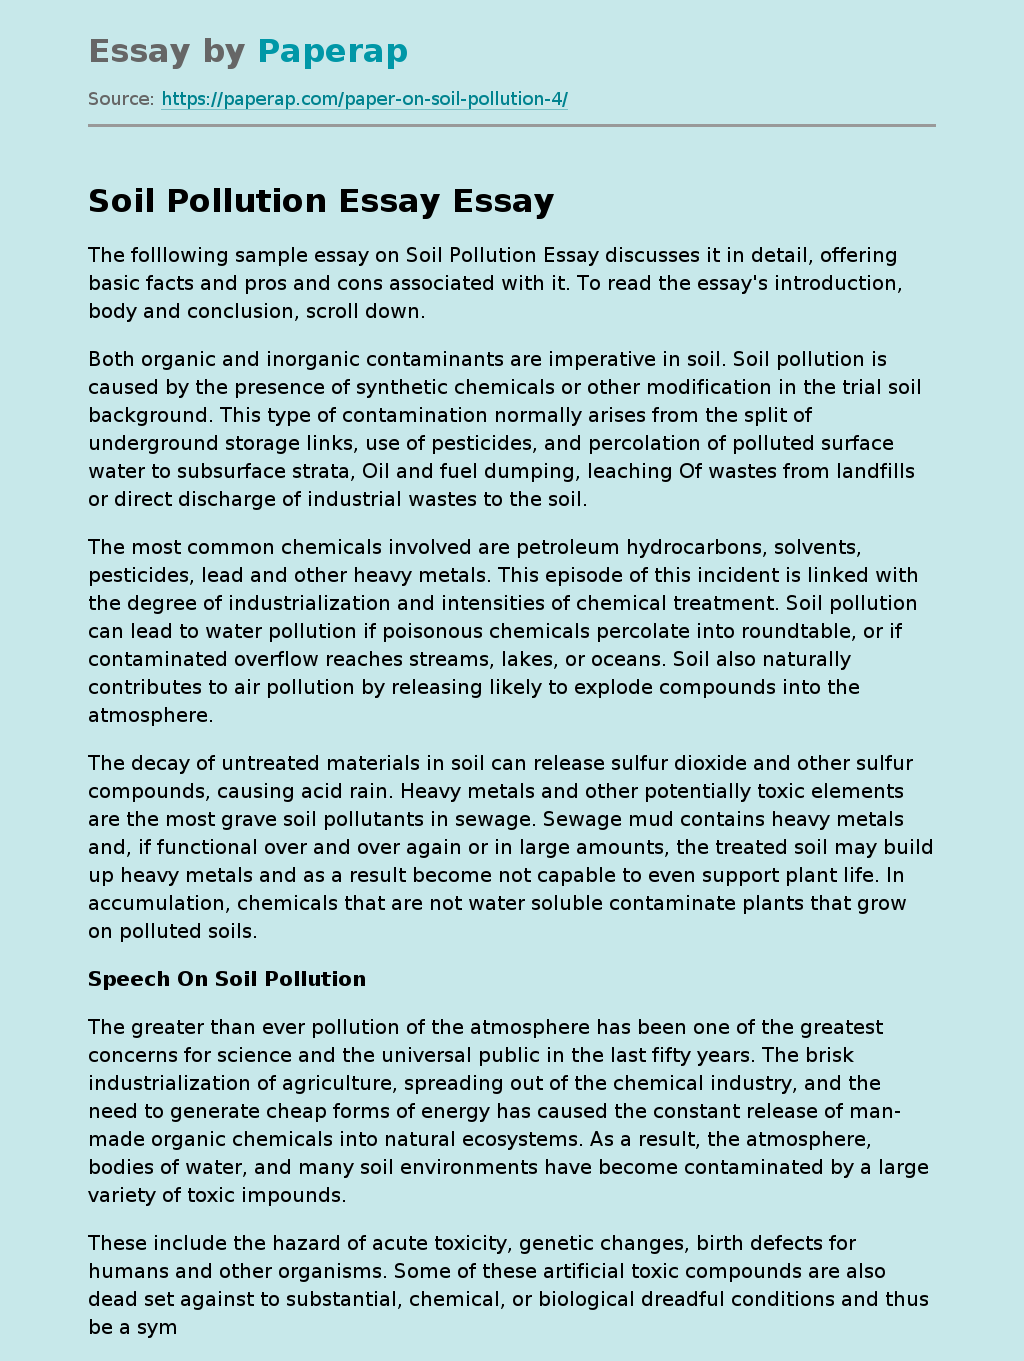 soil pollution essay in 200 words